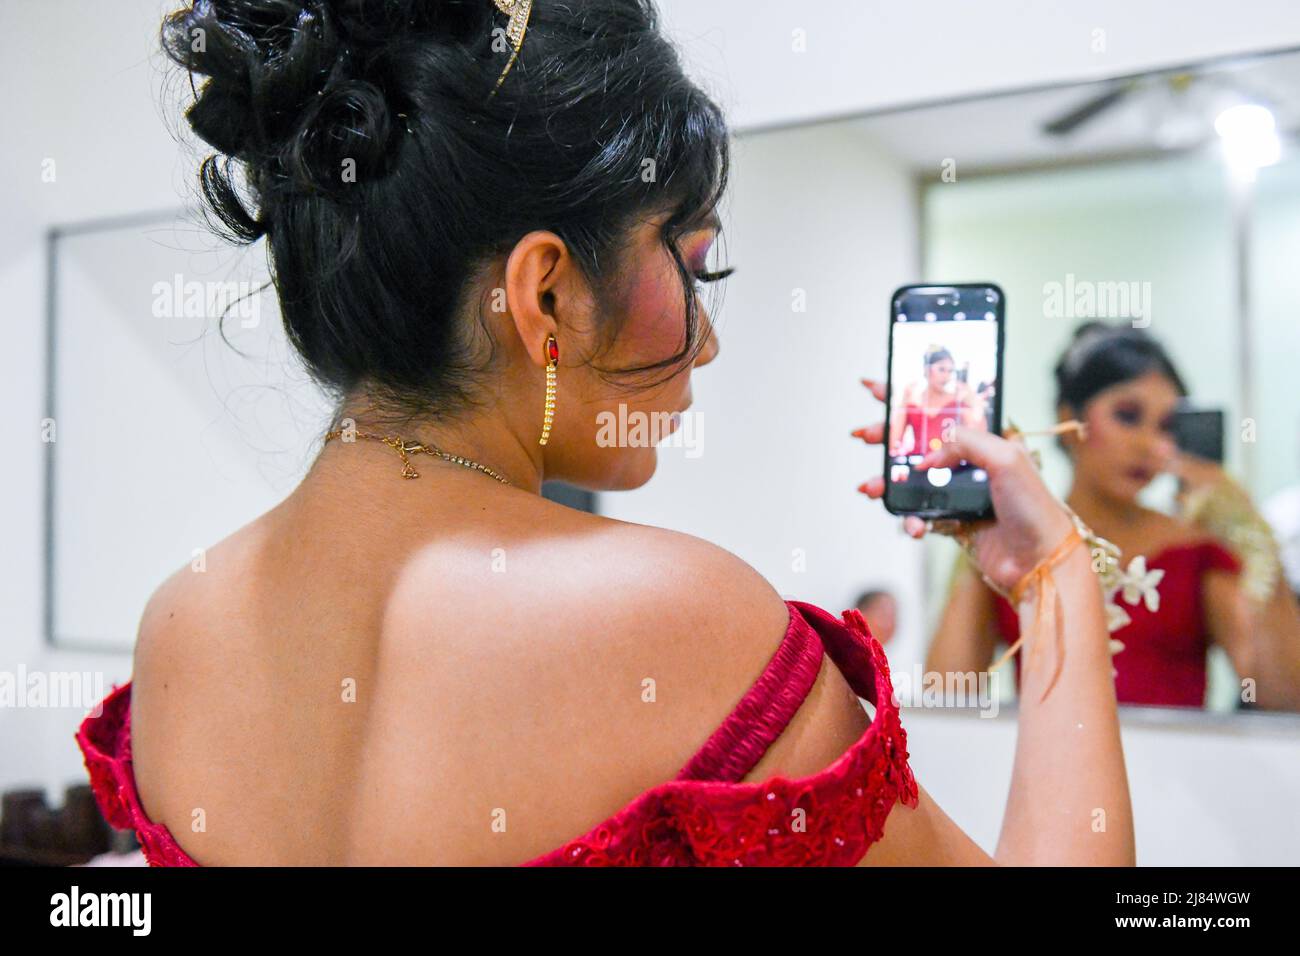 Mexican teen taking a selfie during her Quinceañera that celebrates officially her 15th birthday. This special occasion is celebrated by girls throughout Latin America / Campeche, Mexico Stock Photo